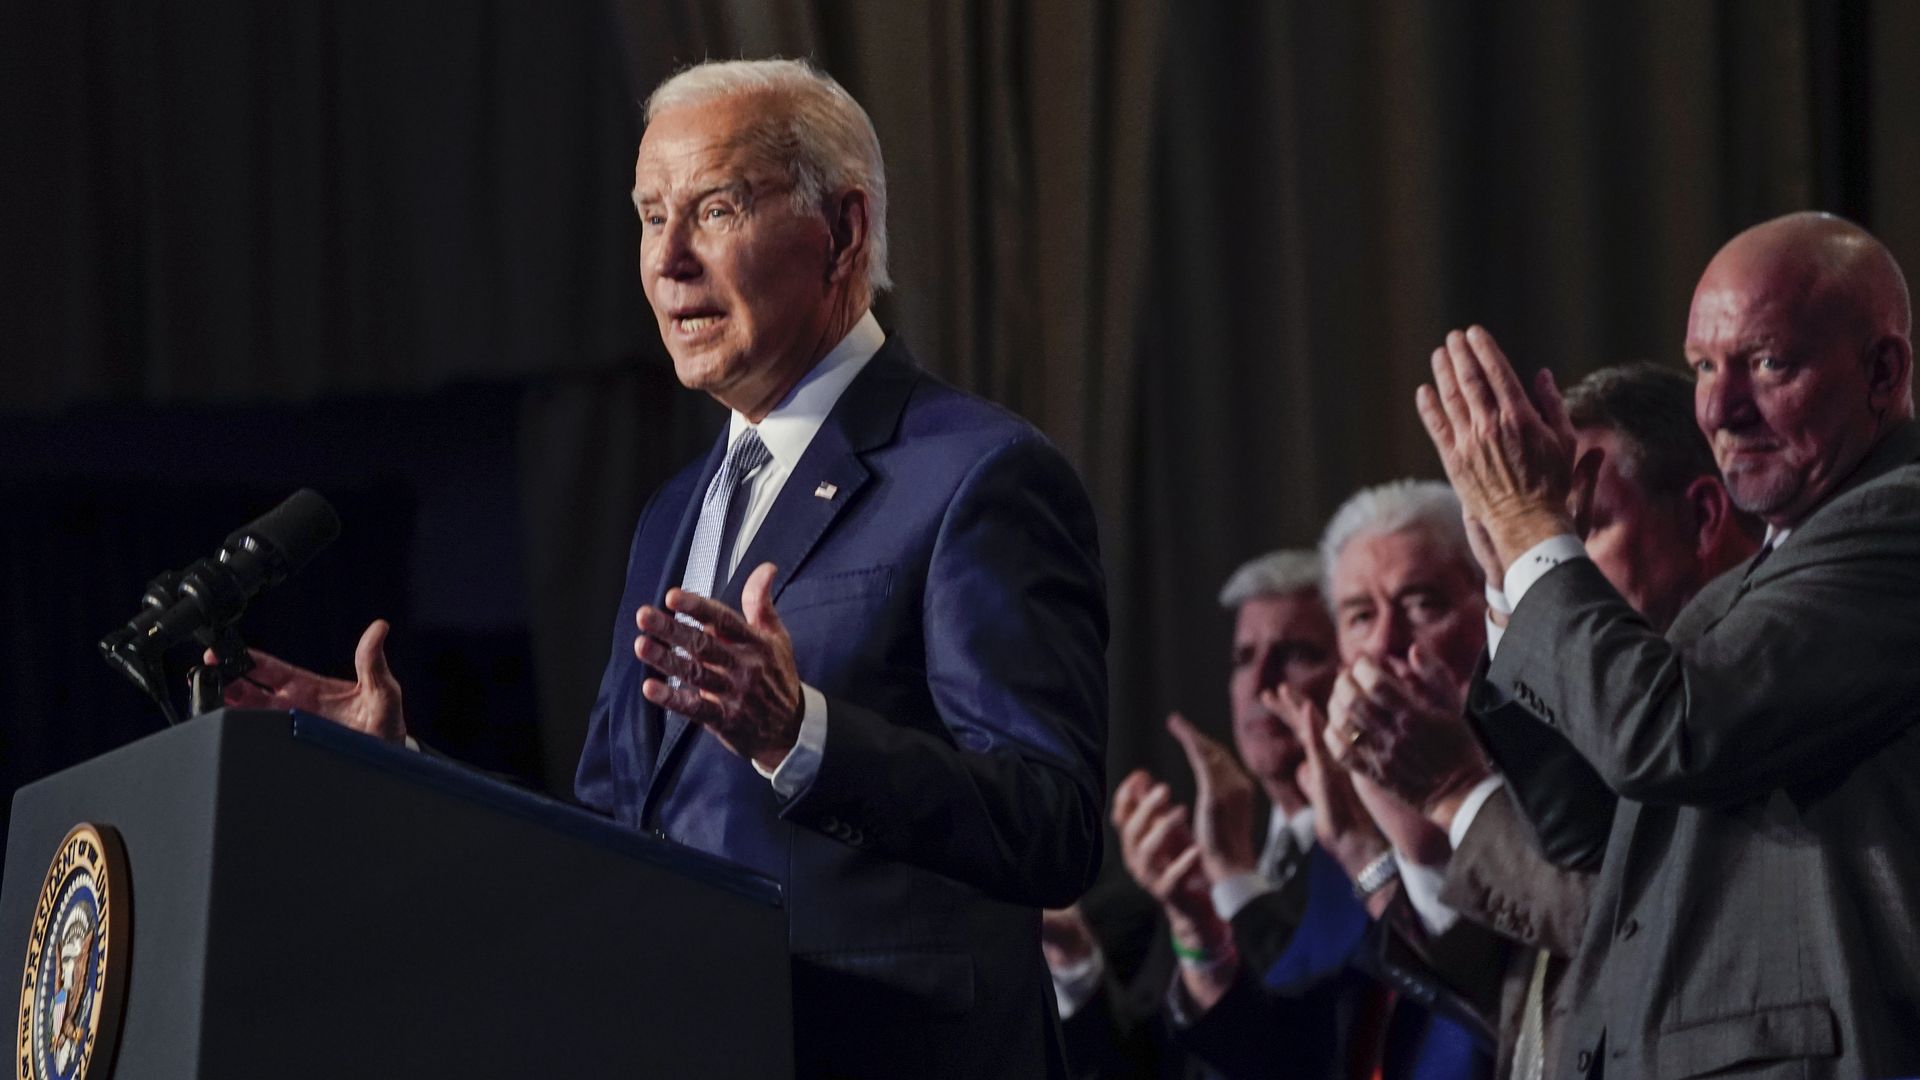 Joe Biden stands at a podium, speaking to a crowd, while a line of people clap behind him.